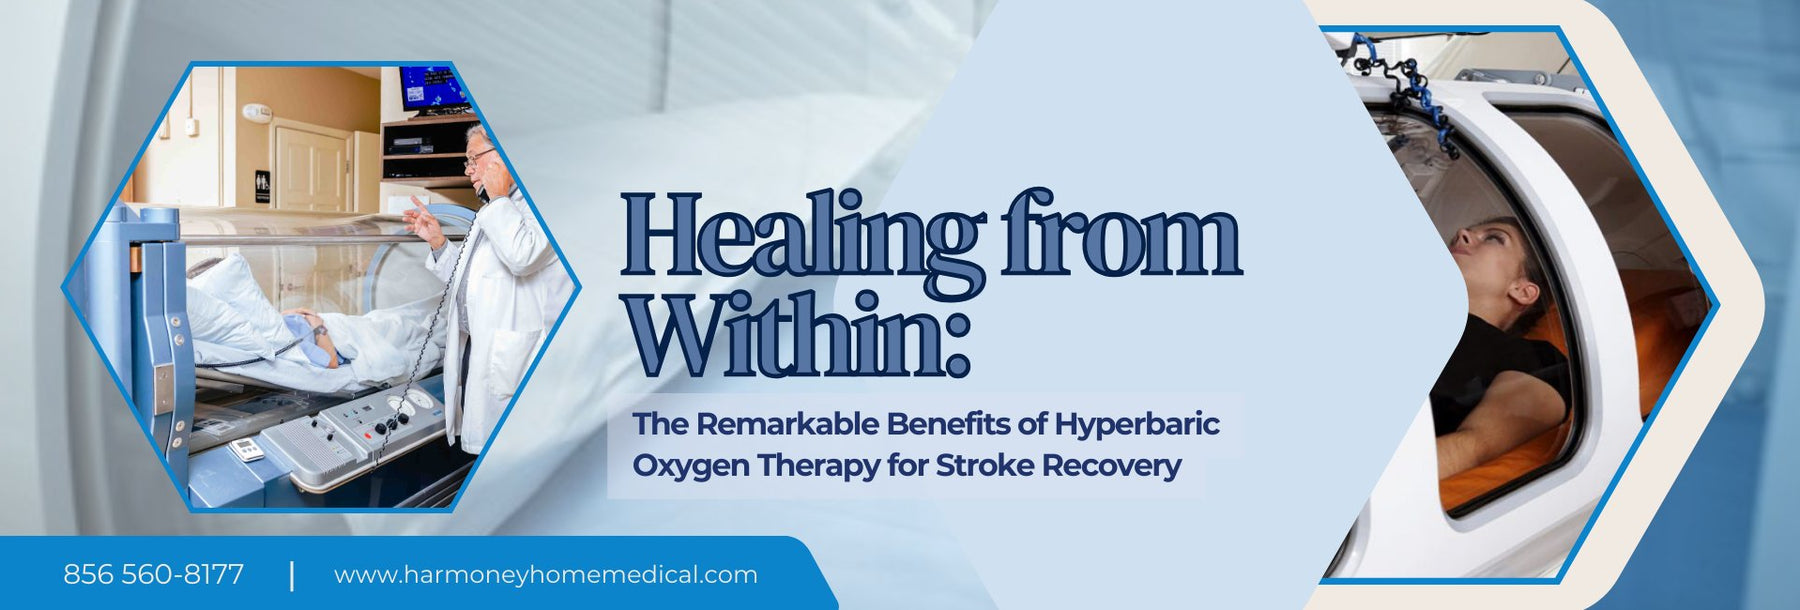 Healing from Within: The Remarkable Benefits of Hyperbaric Oxygen Therapy for Stroke Recovery - Harmony Home Medical Supply